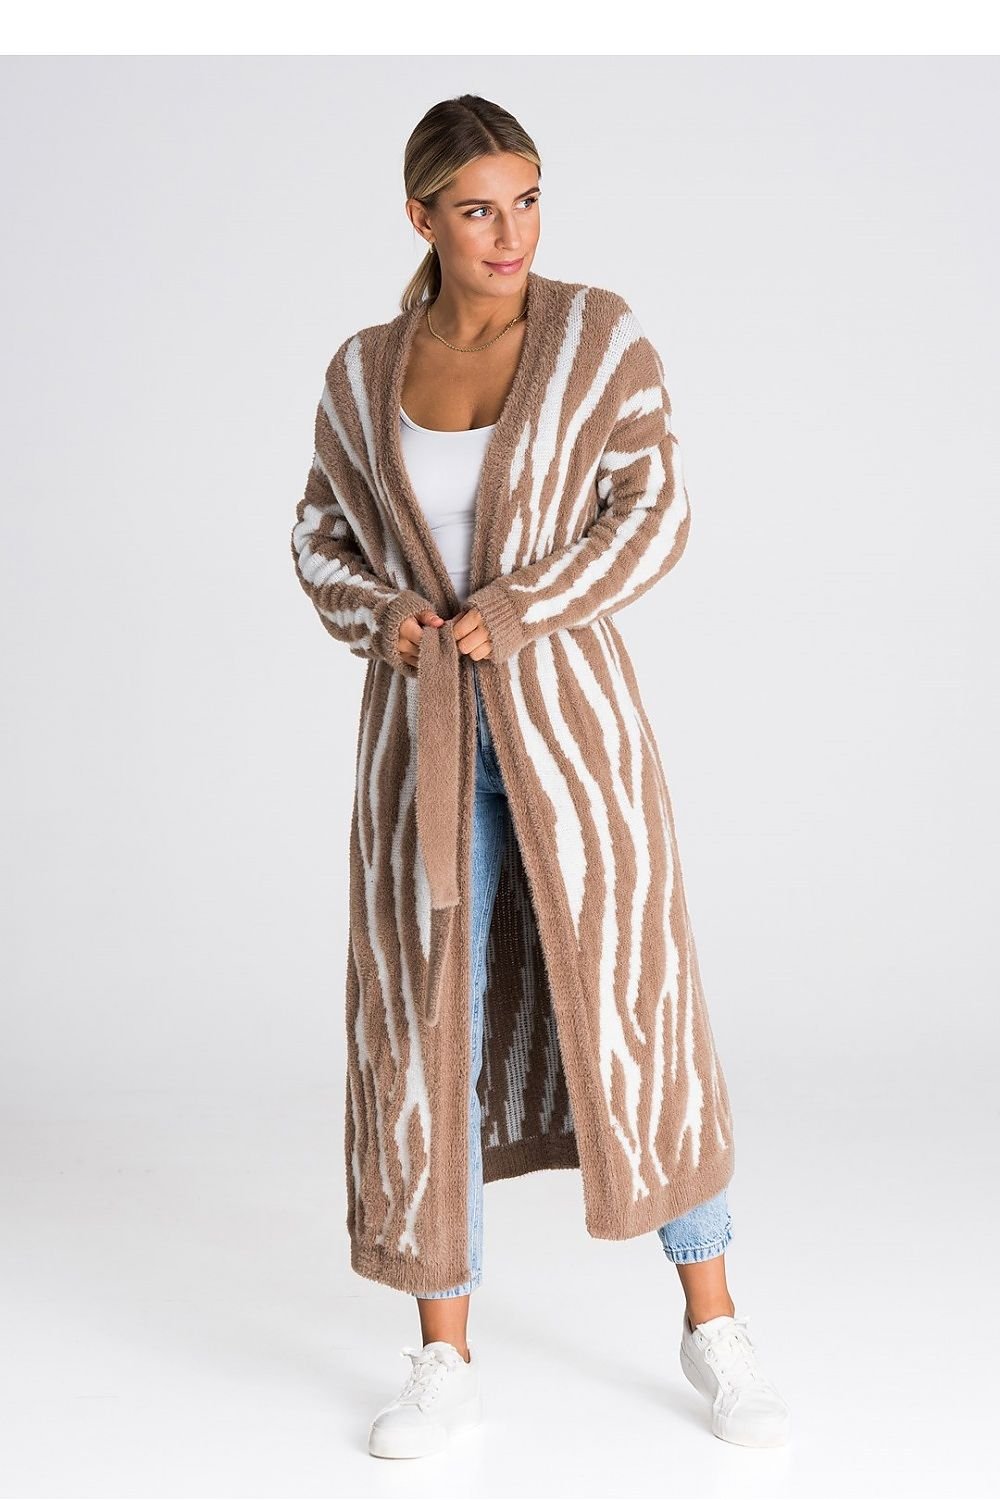 Zebra Print Long Cardigan in Brown and White